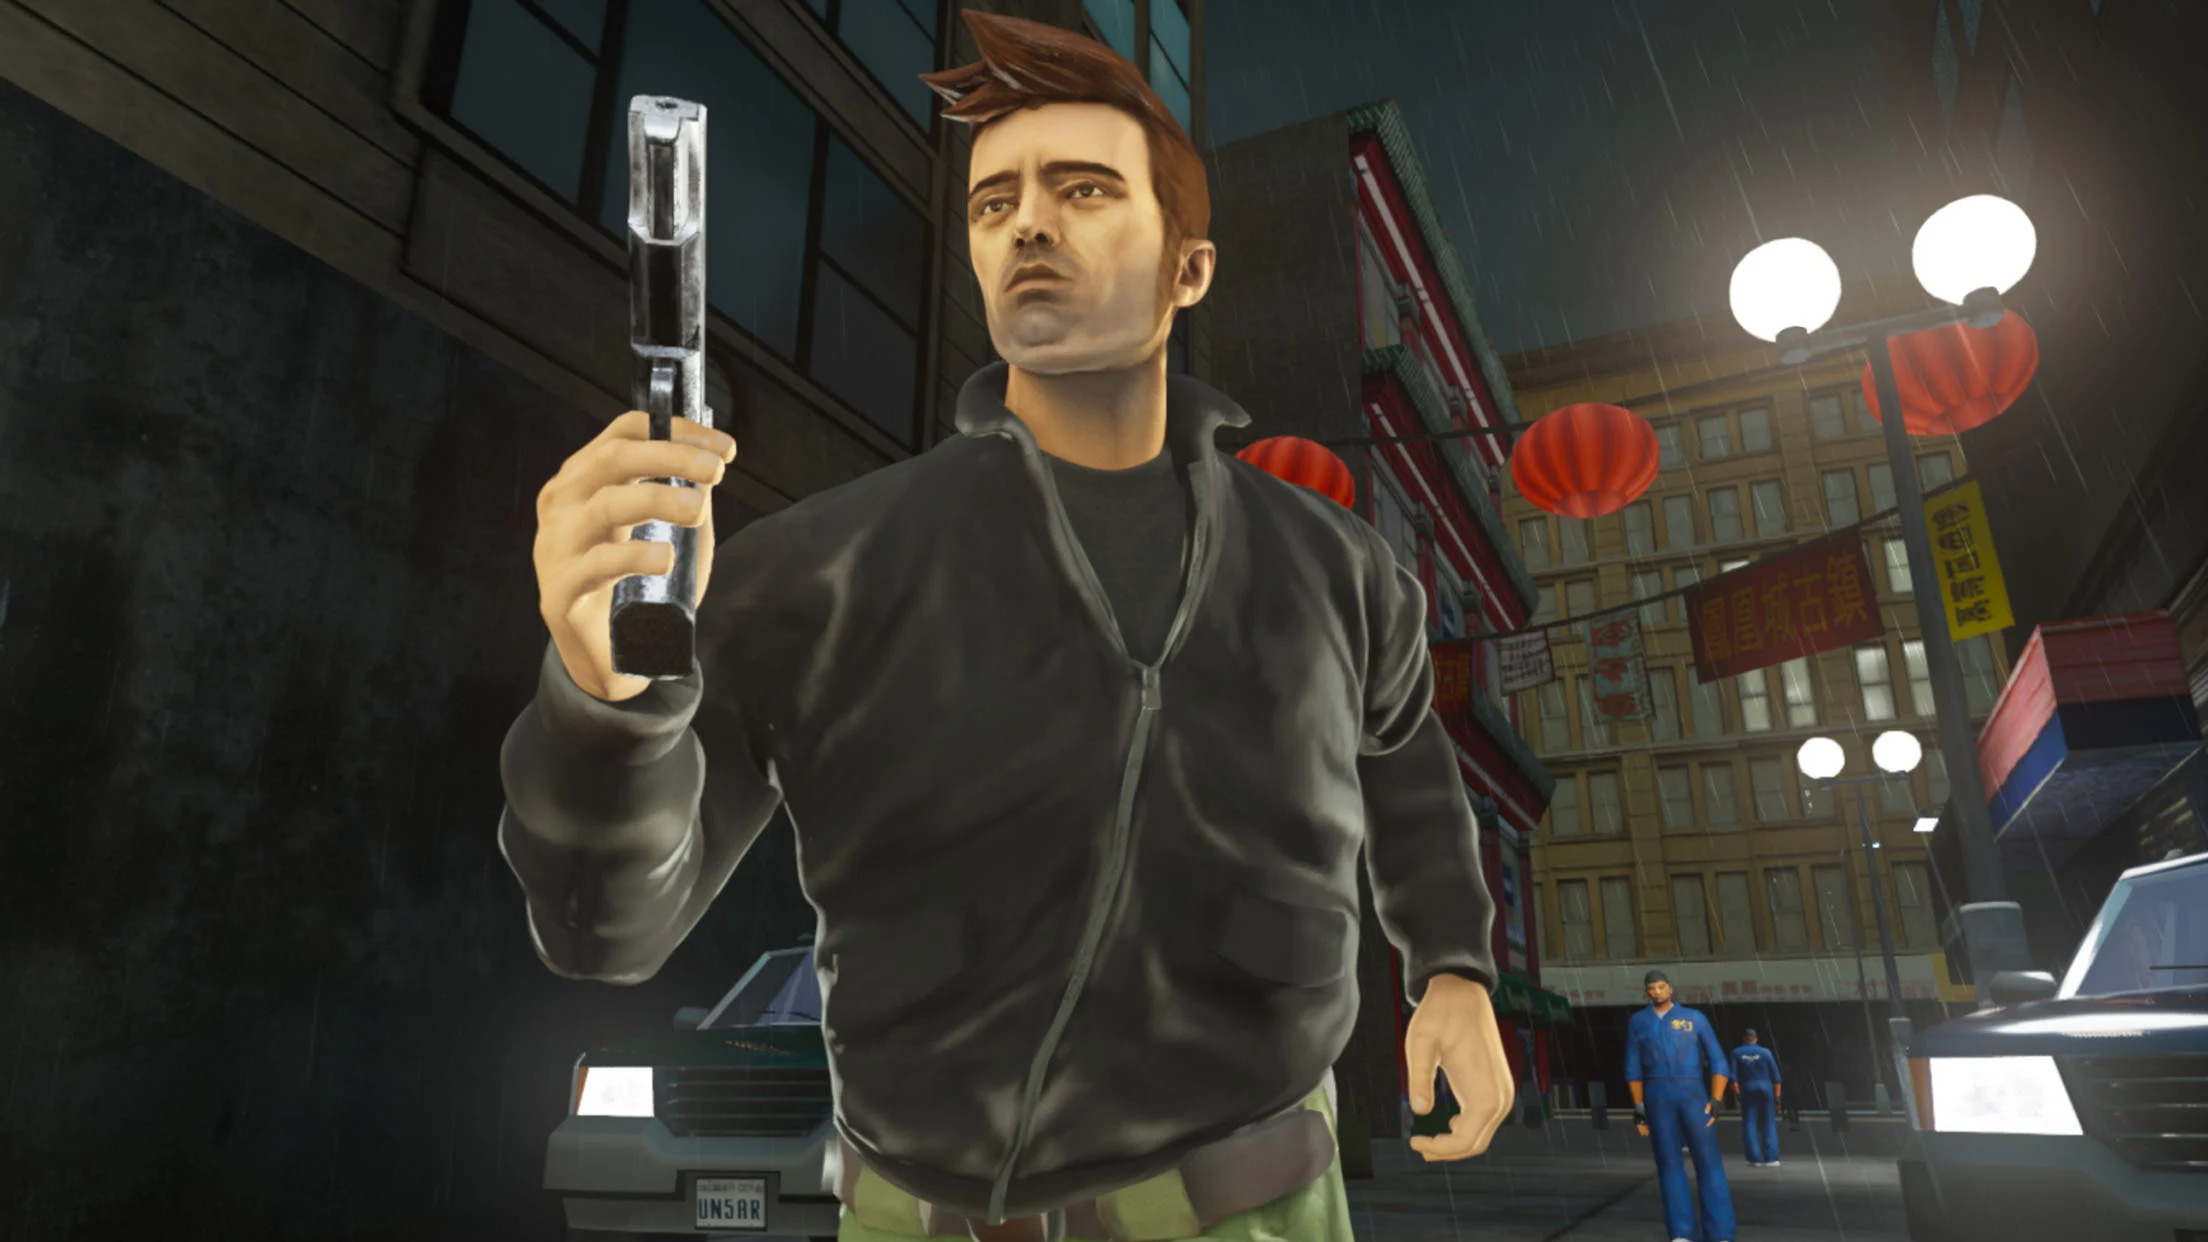 Netflix is bringing three GTA games to Android and iOS - SamMobile